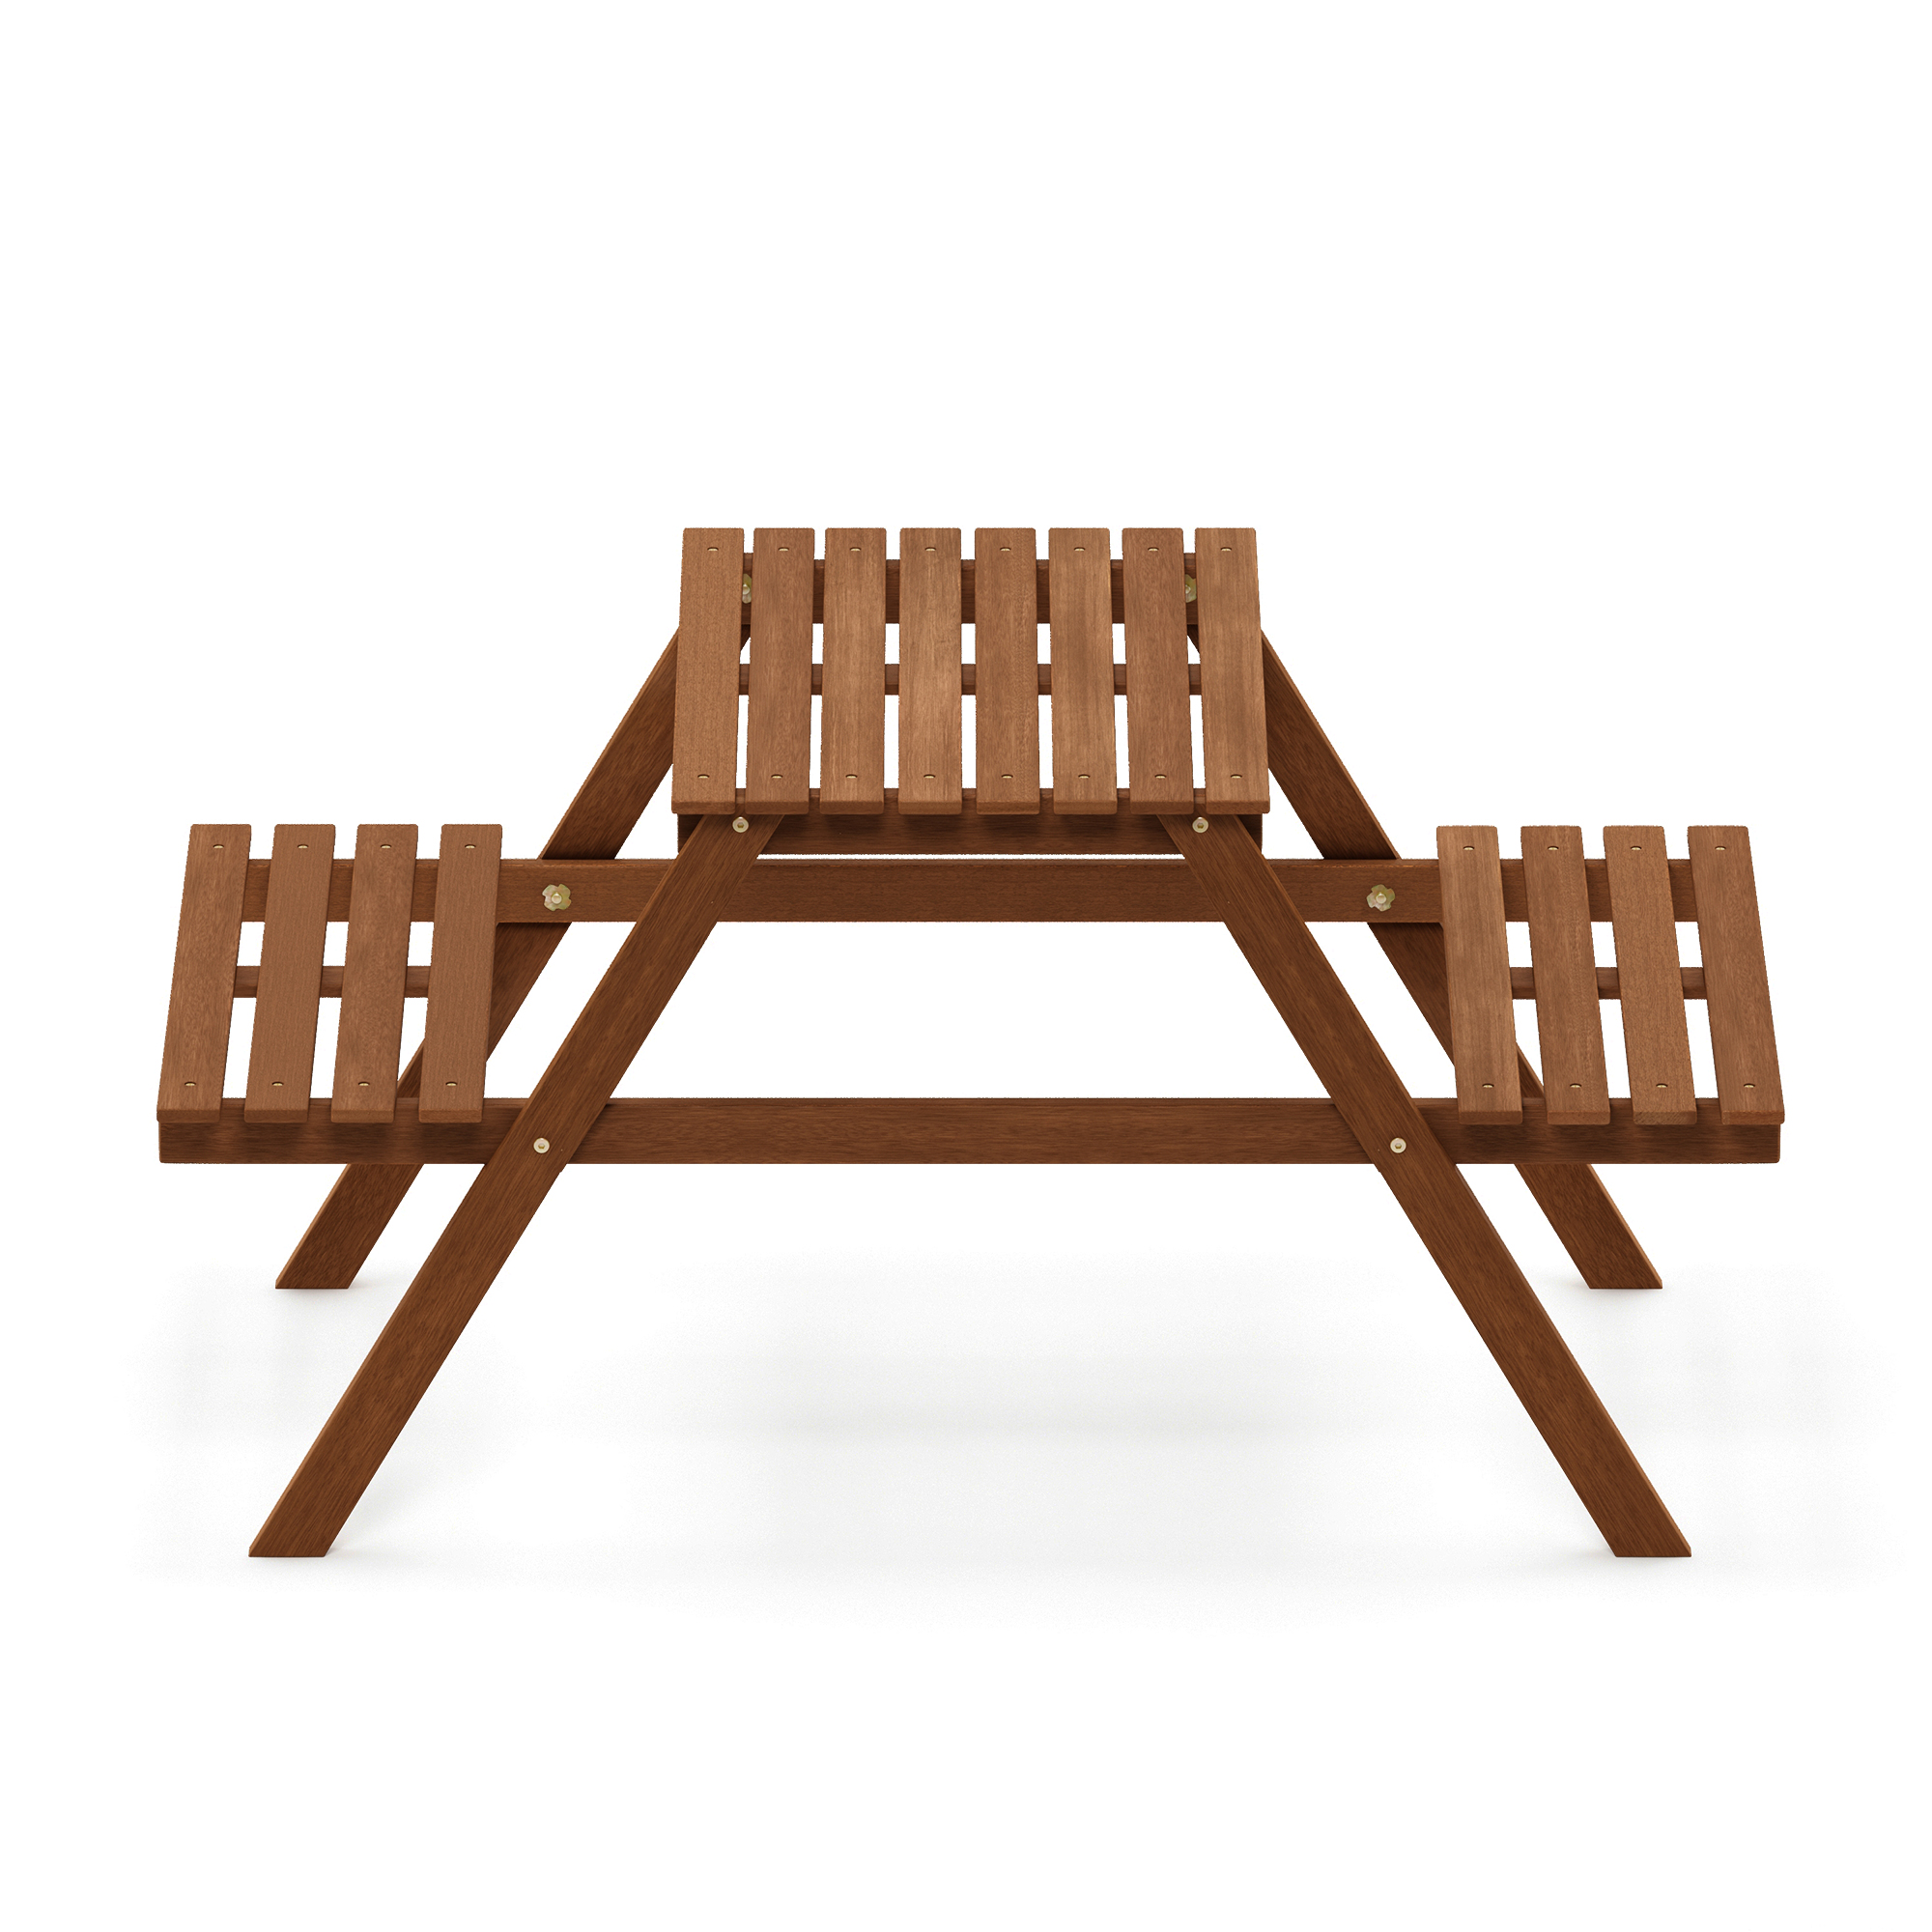 Furinno Tioman Hardwood Kids Picnic Table and Chair Set in Teak Oil - image 3 of 6